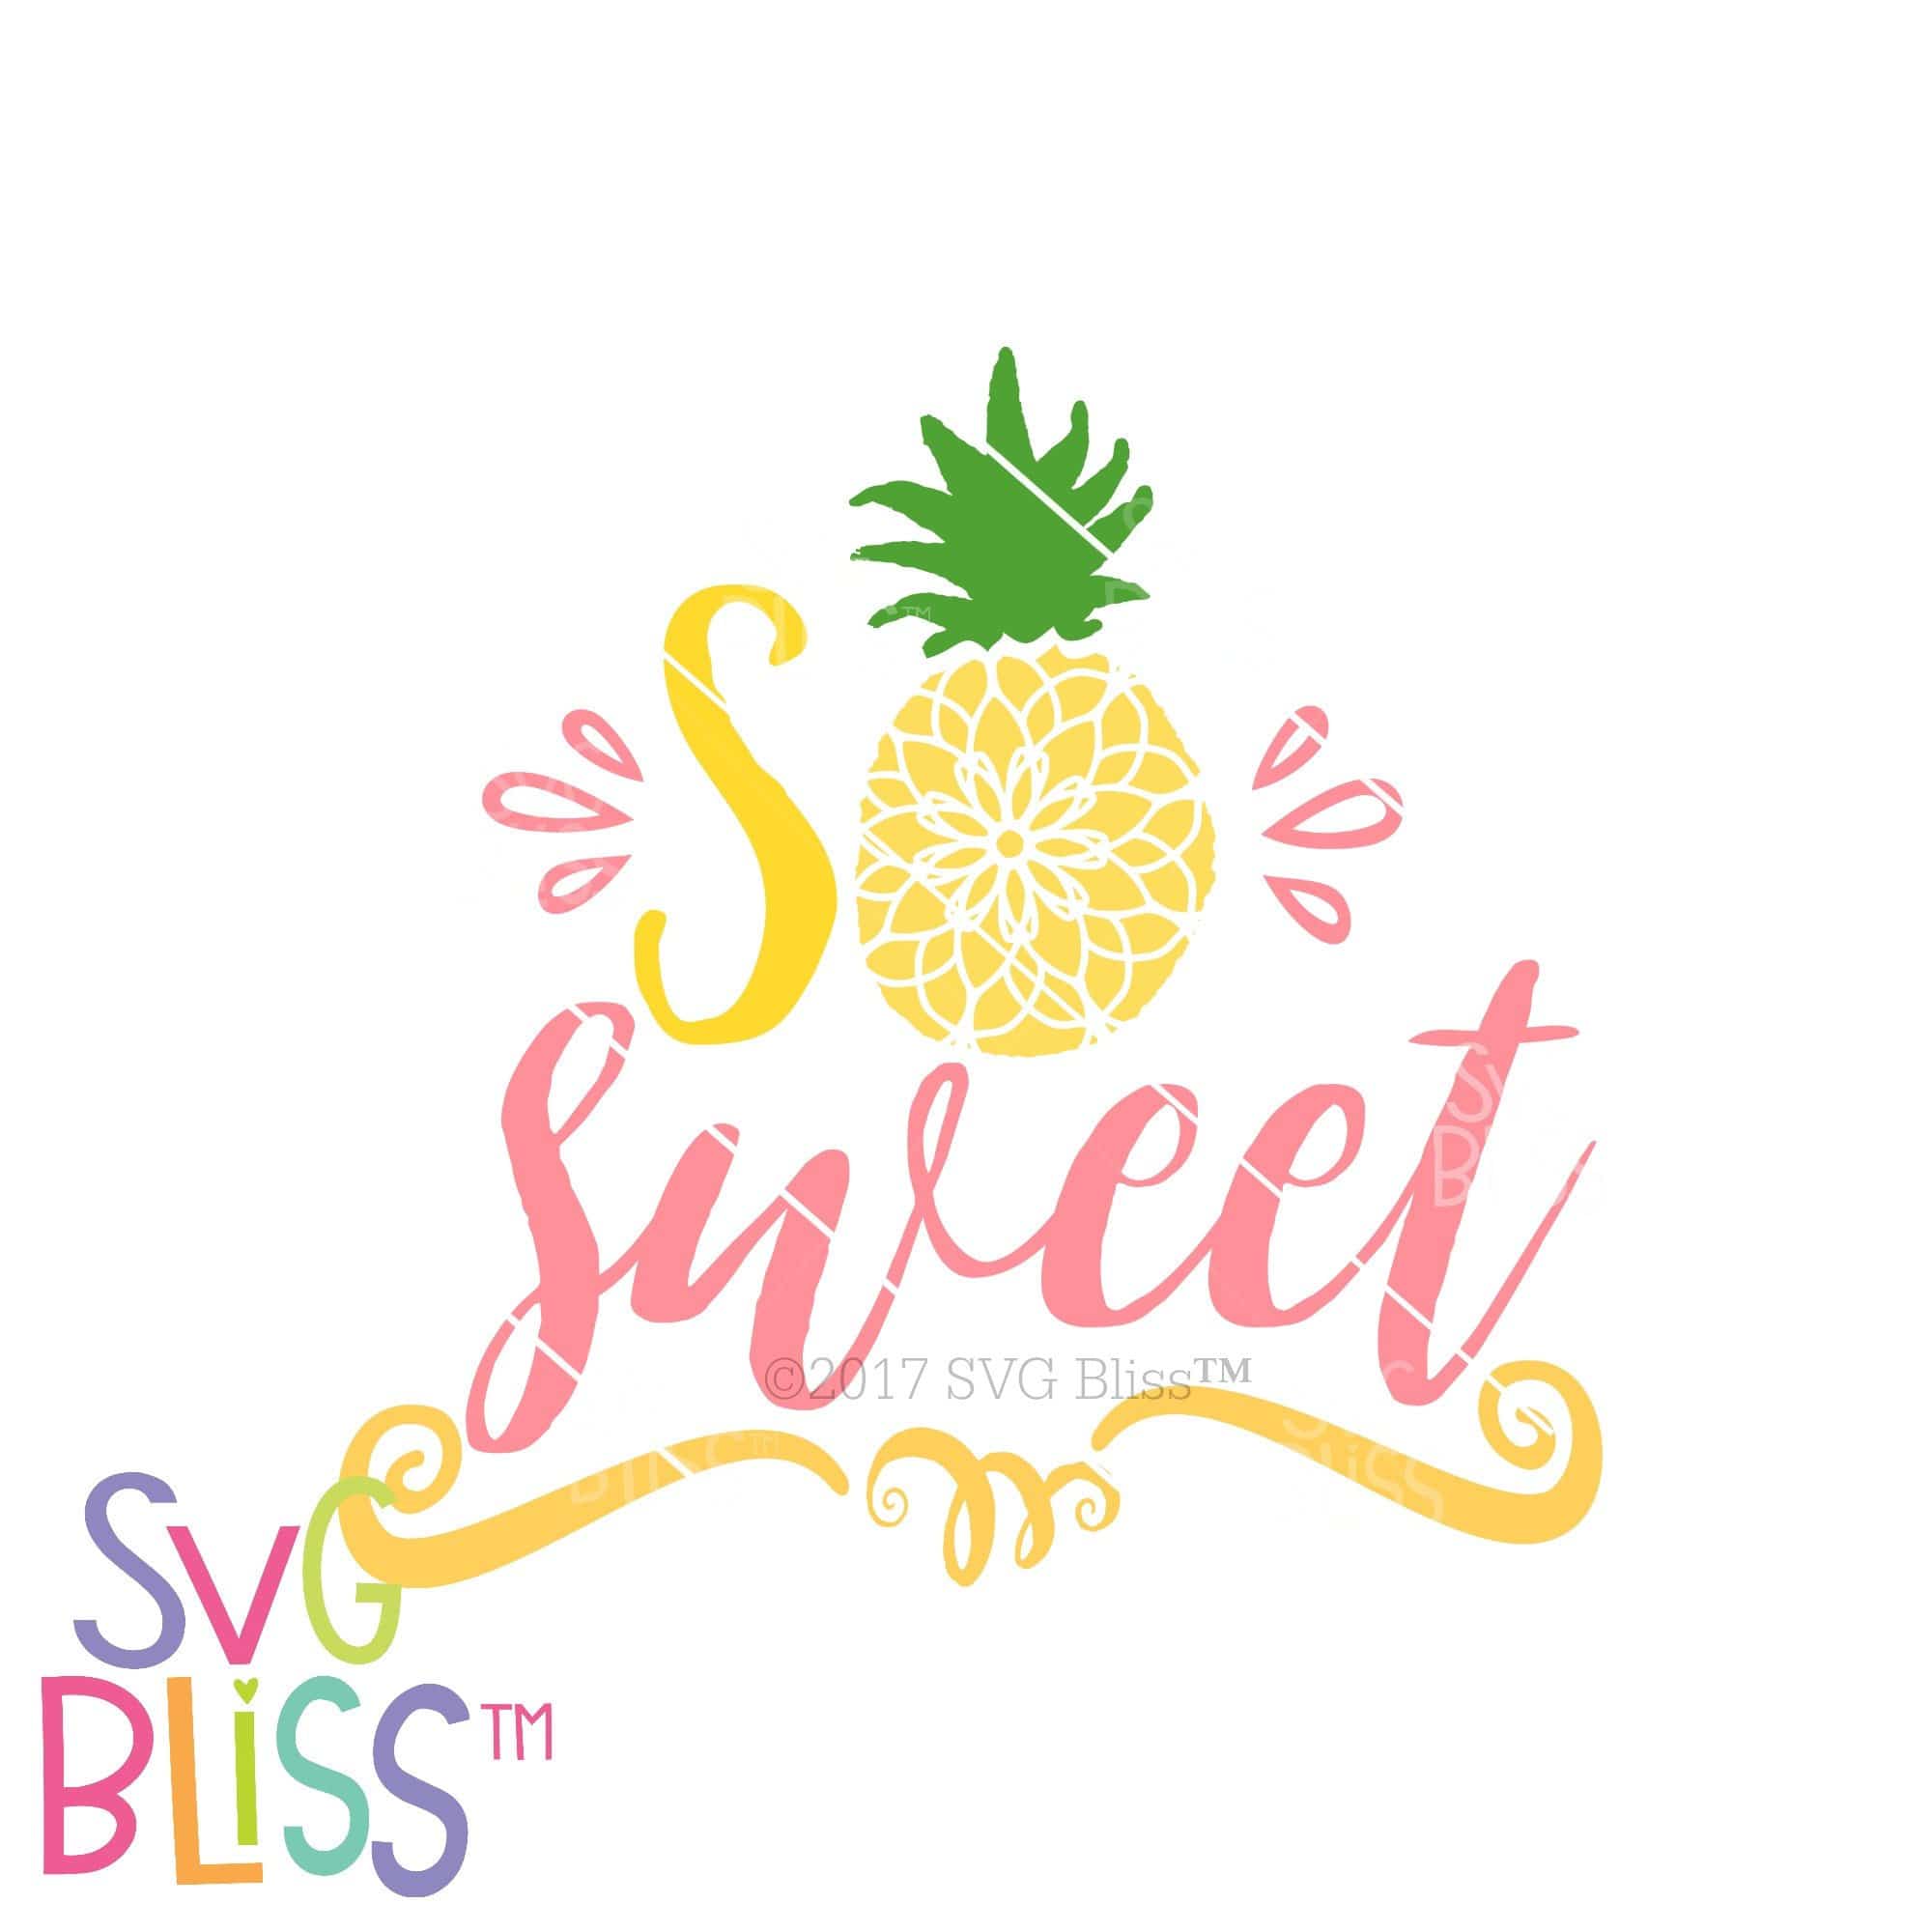 Download So Sweet Pineapple| SVG EPS DXF PNG - SVG Bliss